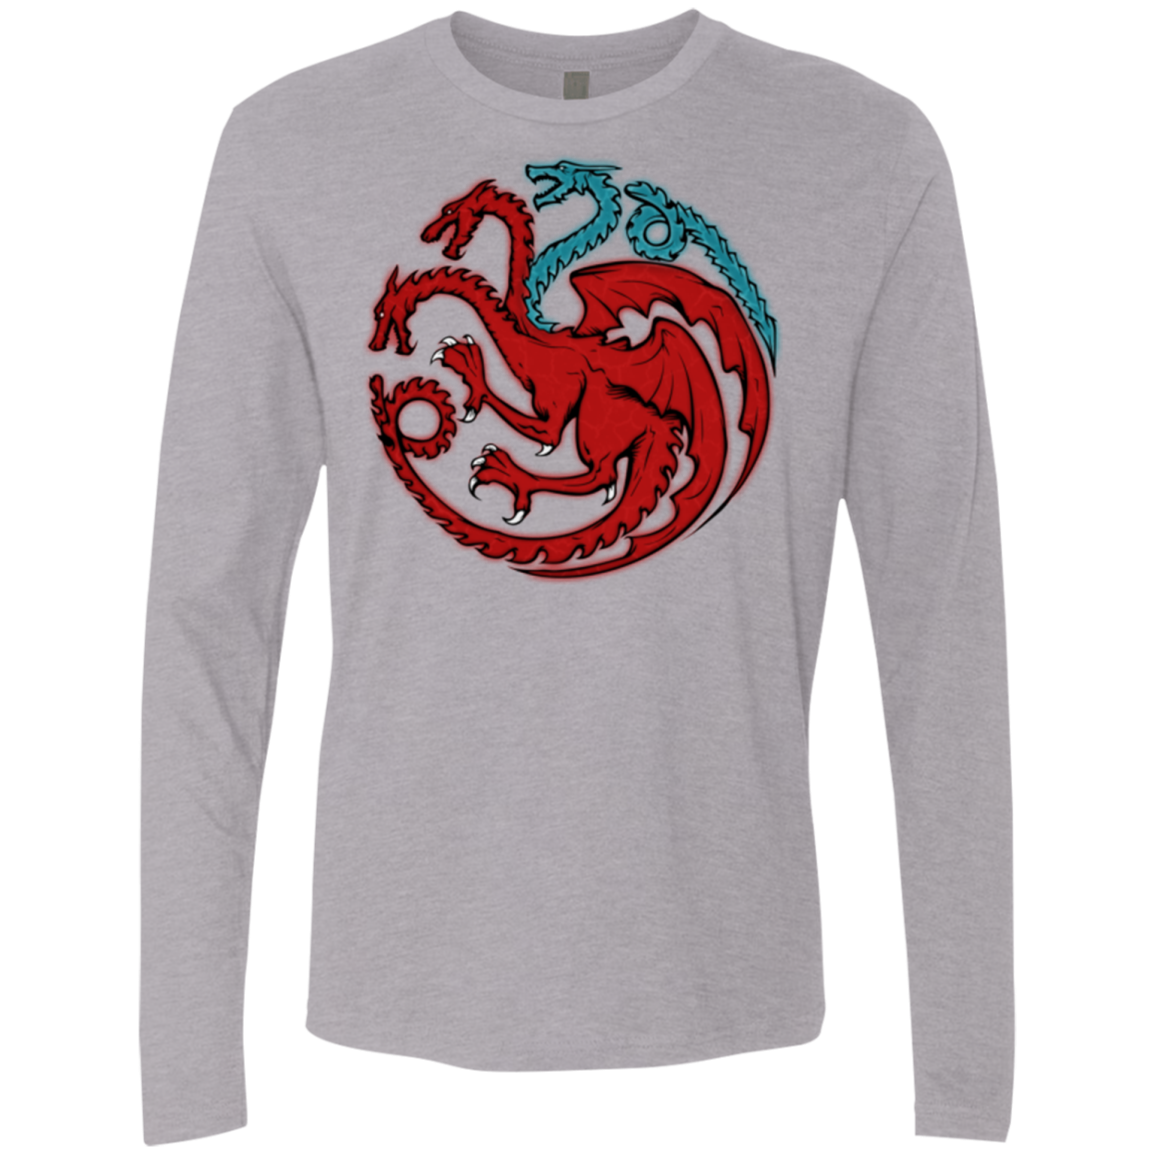 Trinity of fire and ice V2 Men's Premium Long Sleeve